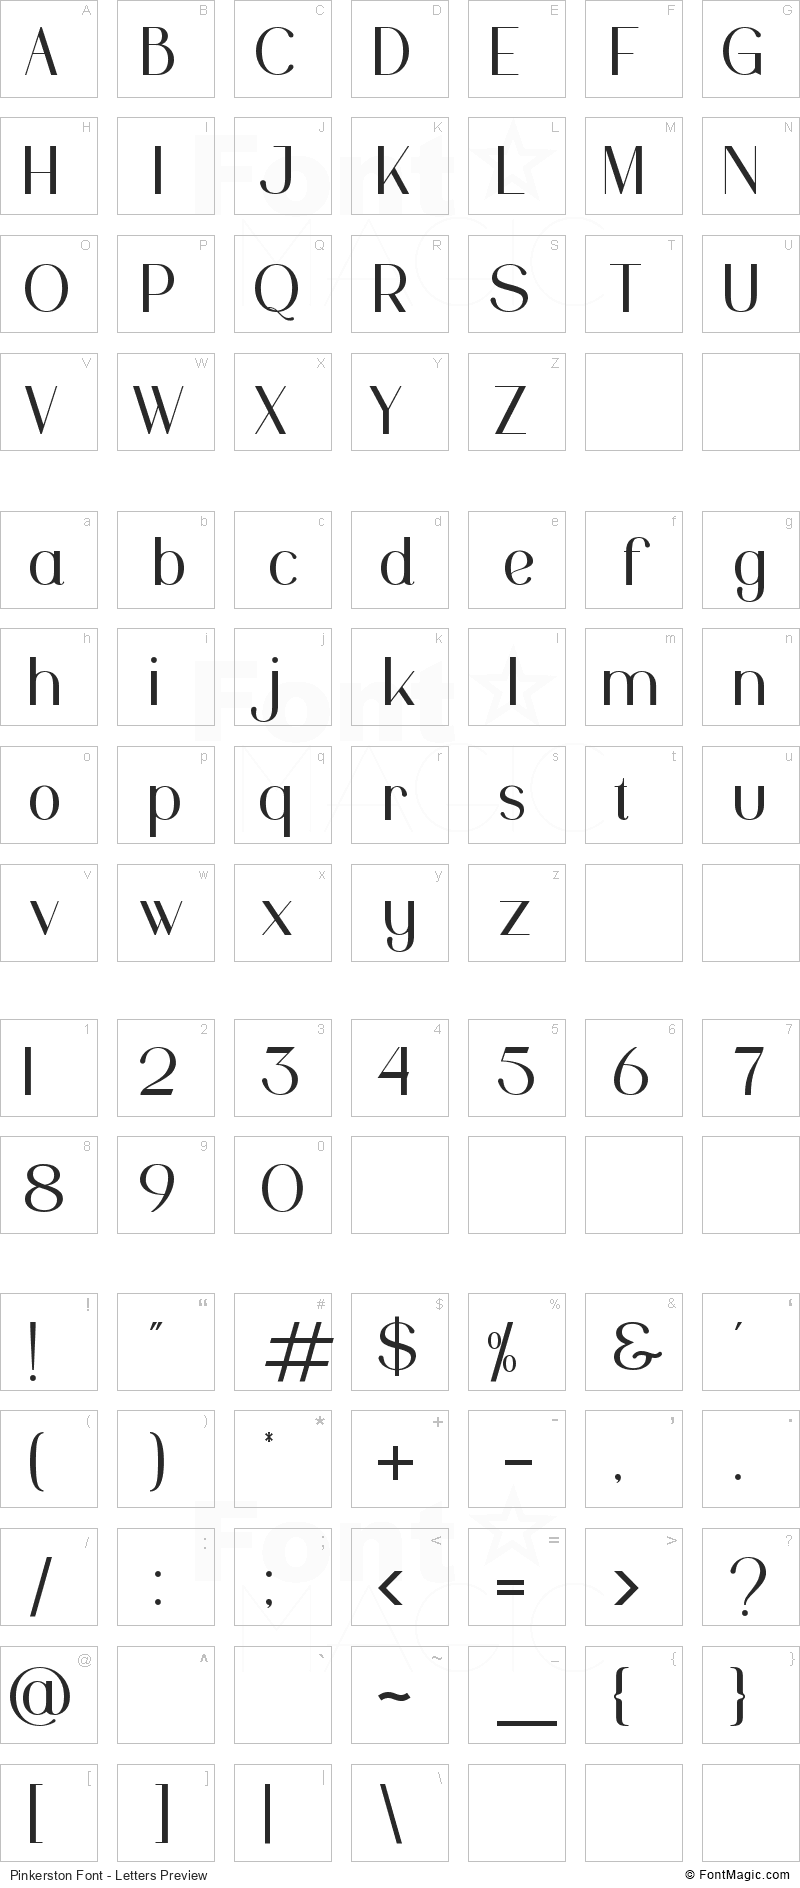 Pinkerston Font - All Latters Preview Chart